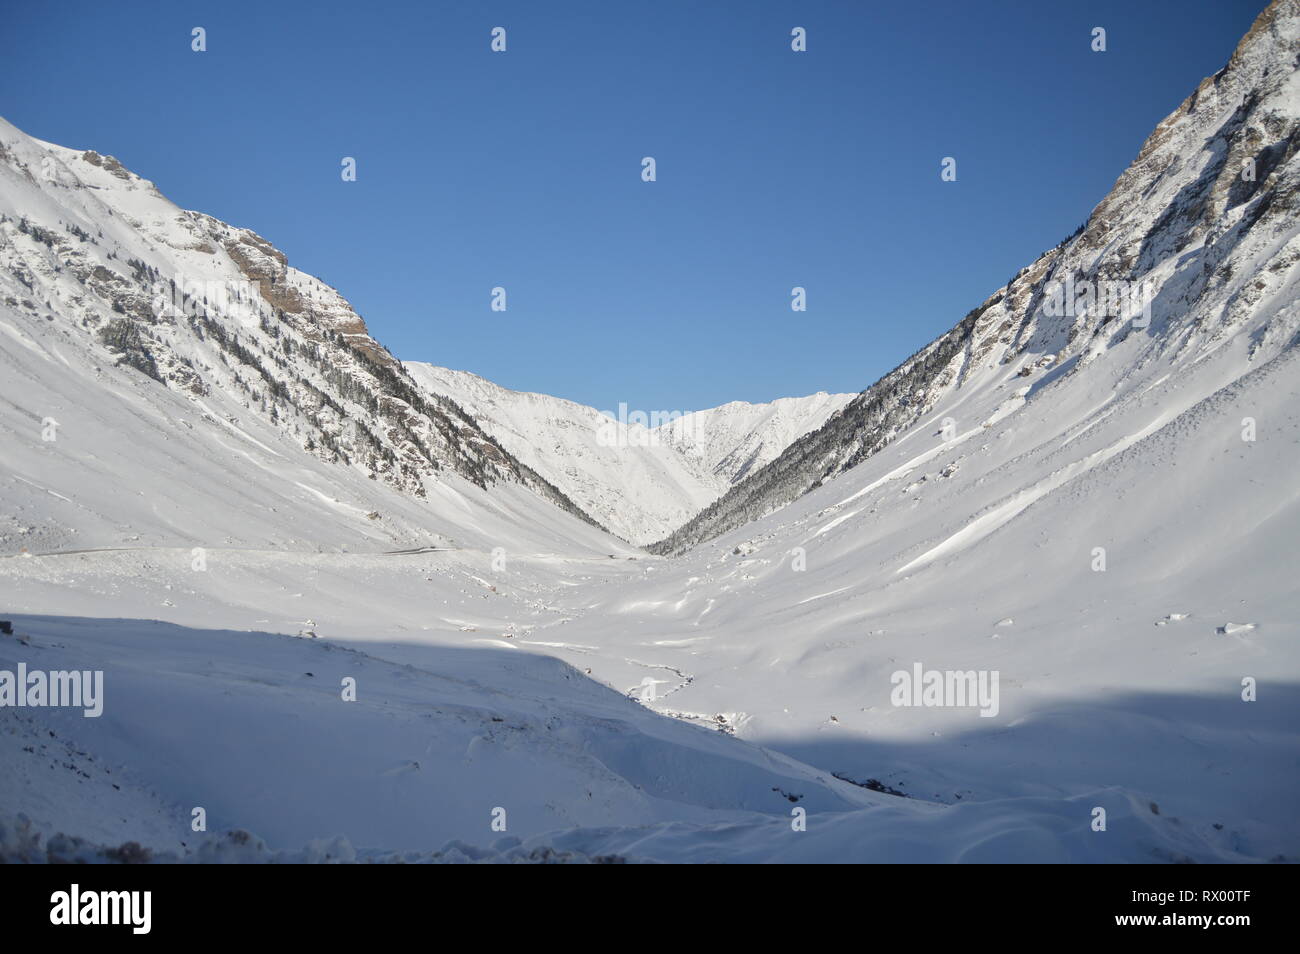 Beautiful Snowy Mountains Of Crete Of Bataillence In Aragnouet. Nature, Travel, Landscapes. December 29, 2014. Aragnouet, Midday-Pyrenees, France. Stock Photo